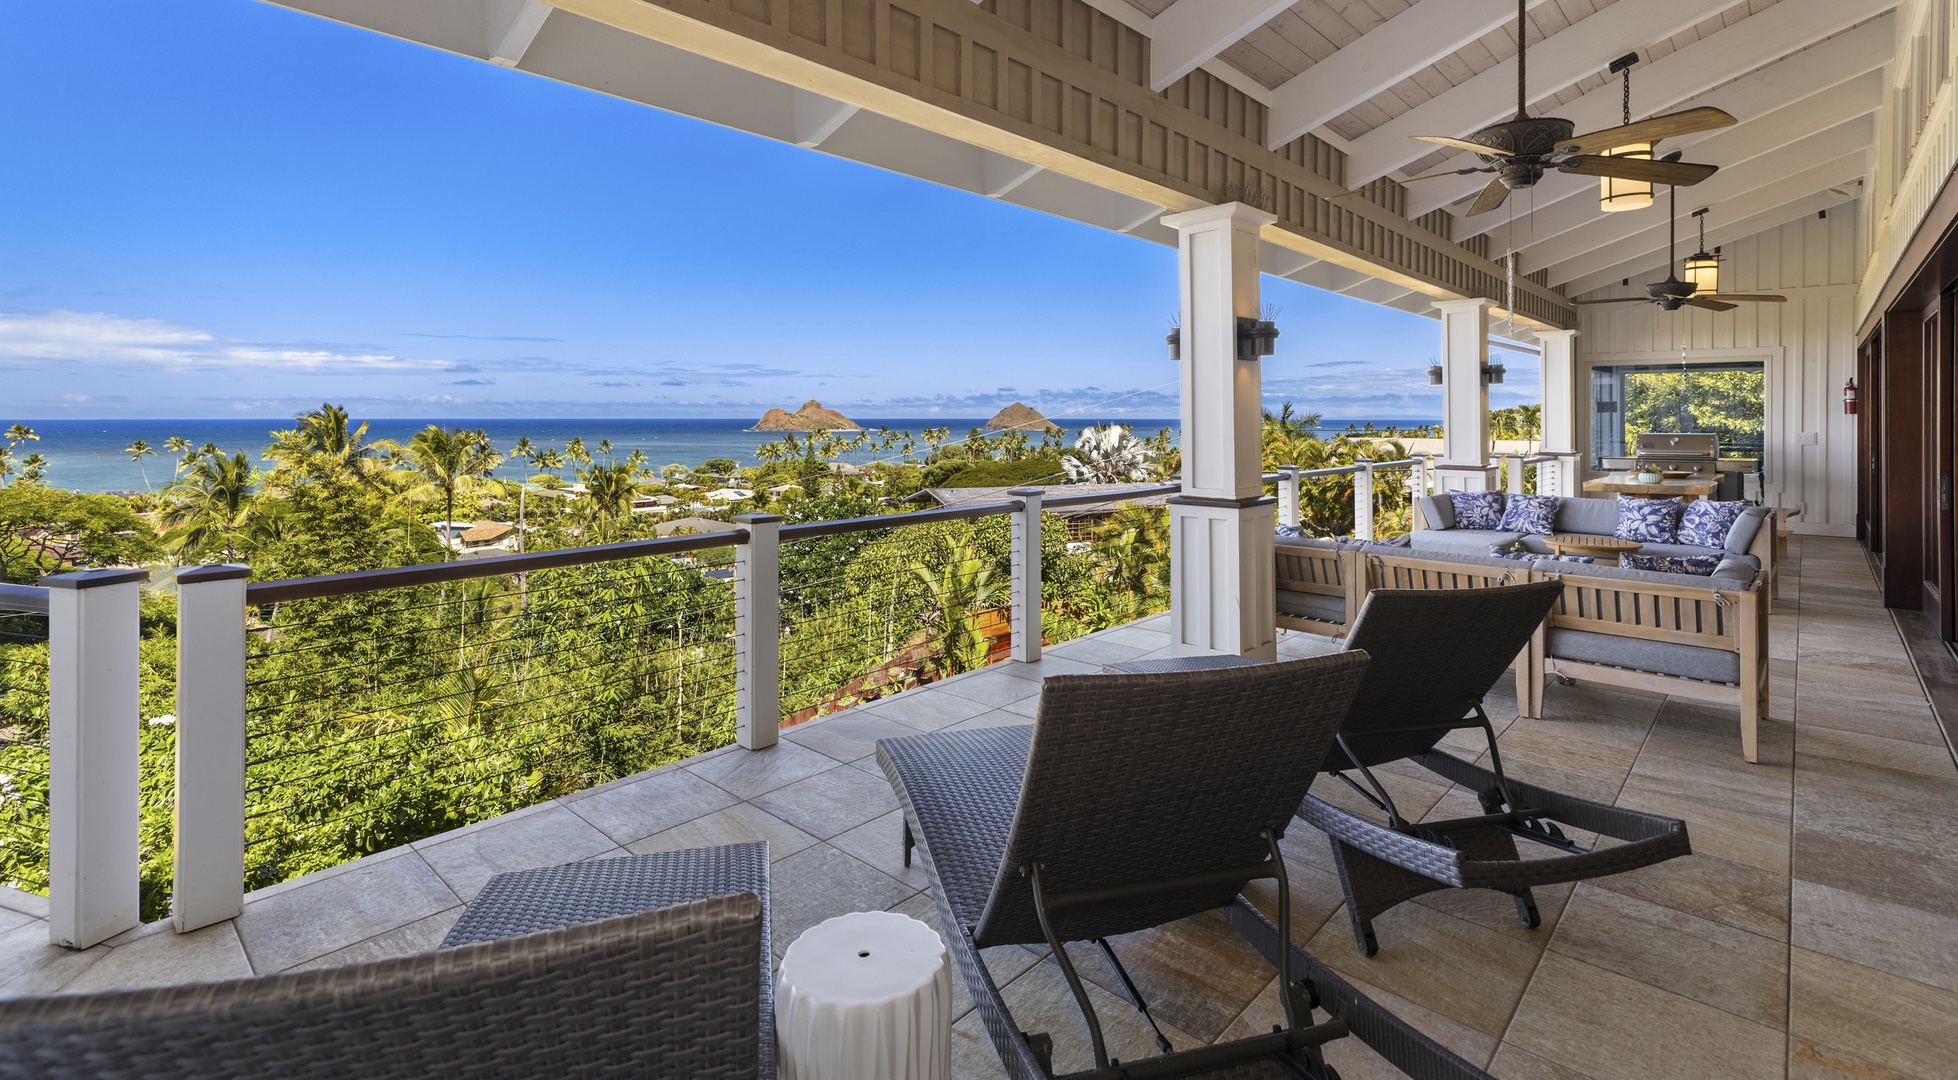 Kailua Vacation Rentals, Lanikai Villa - Take in the calm, serene vibes with expansive ocean views from your chaise lounge